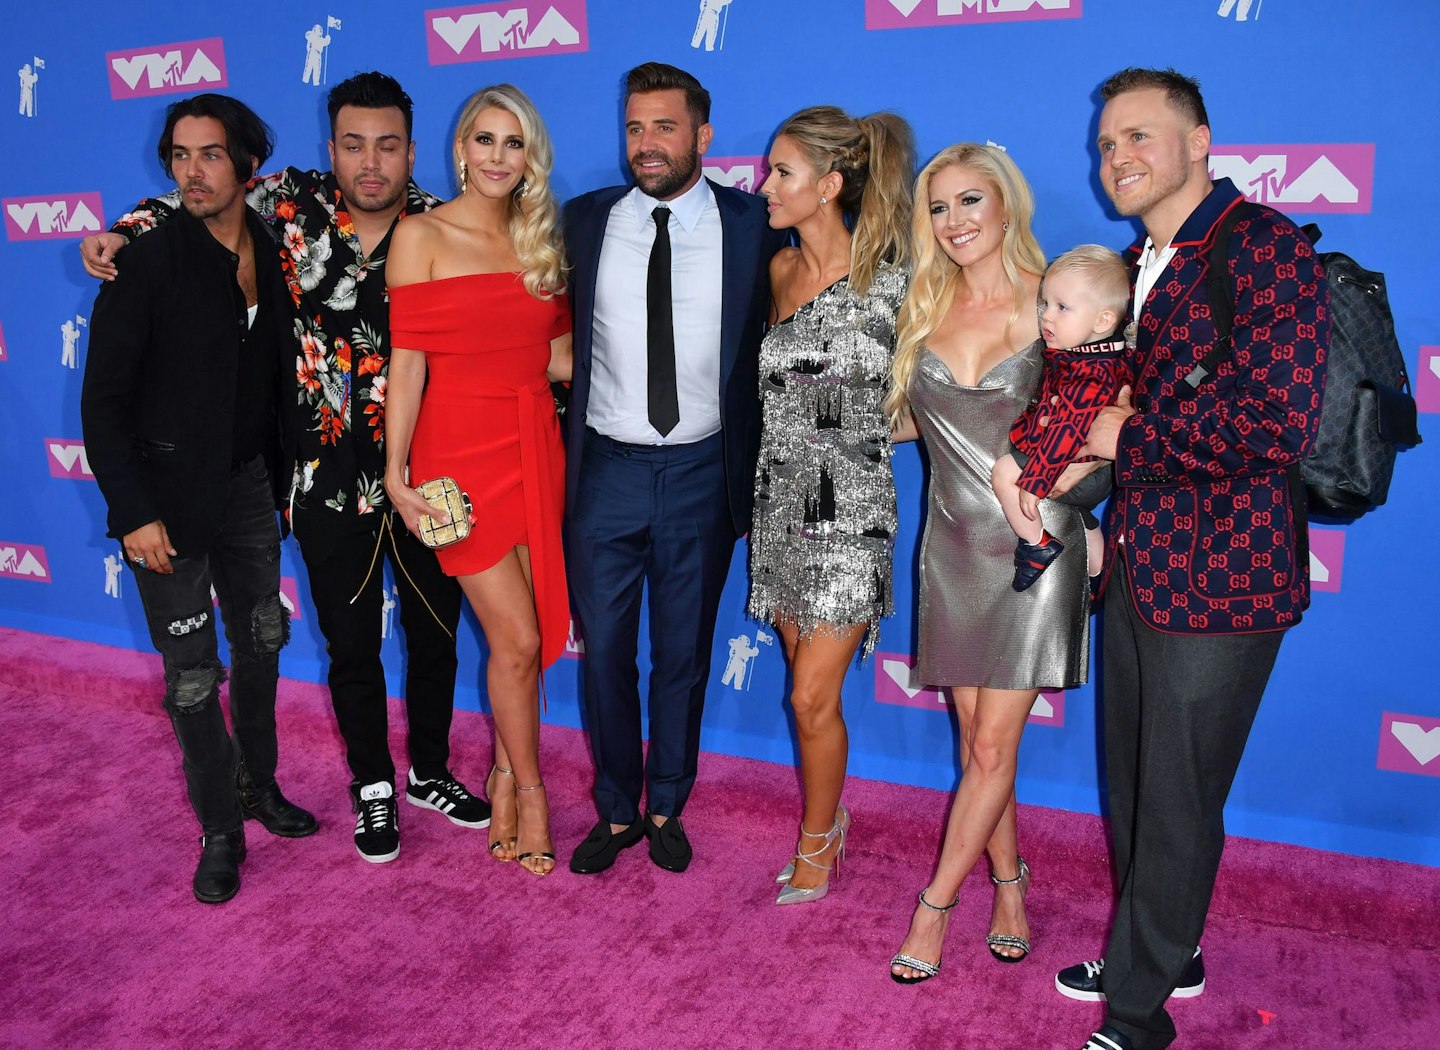 The cast of The Hills at the 2018 MTV VMAs